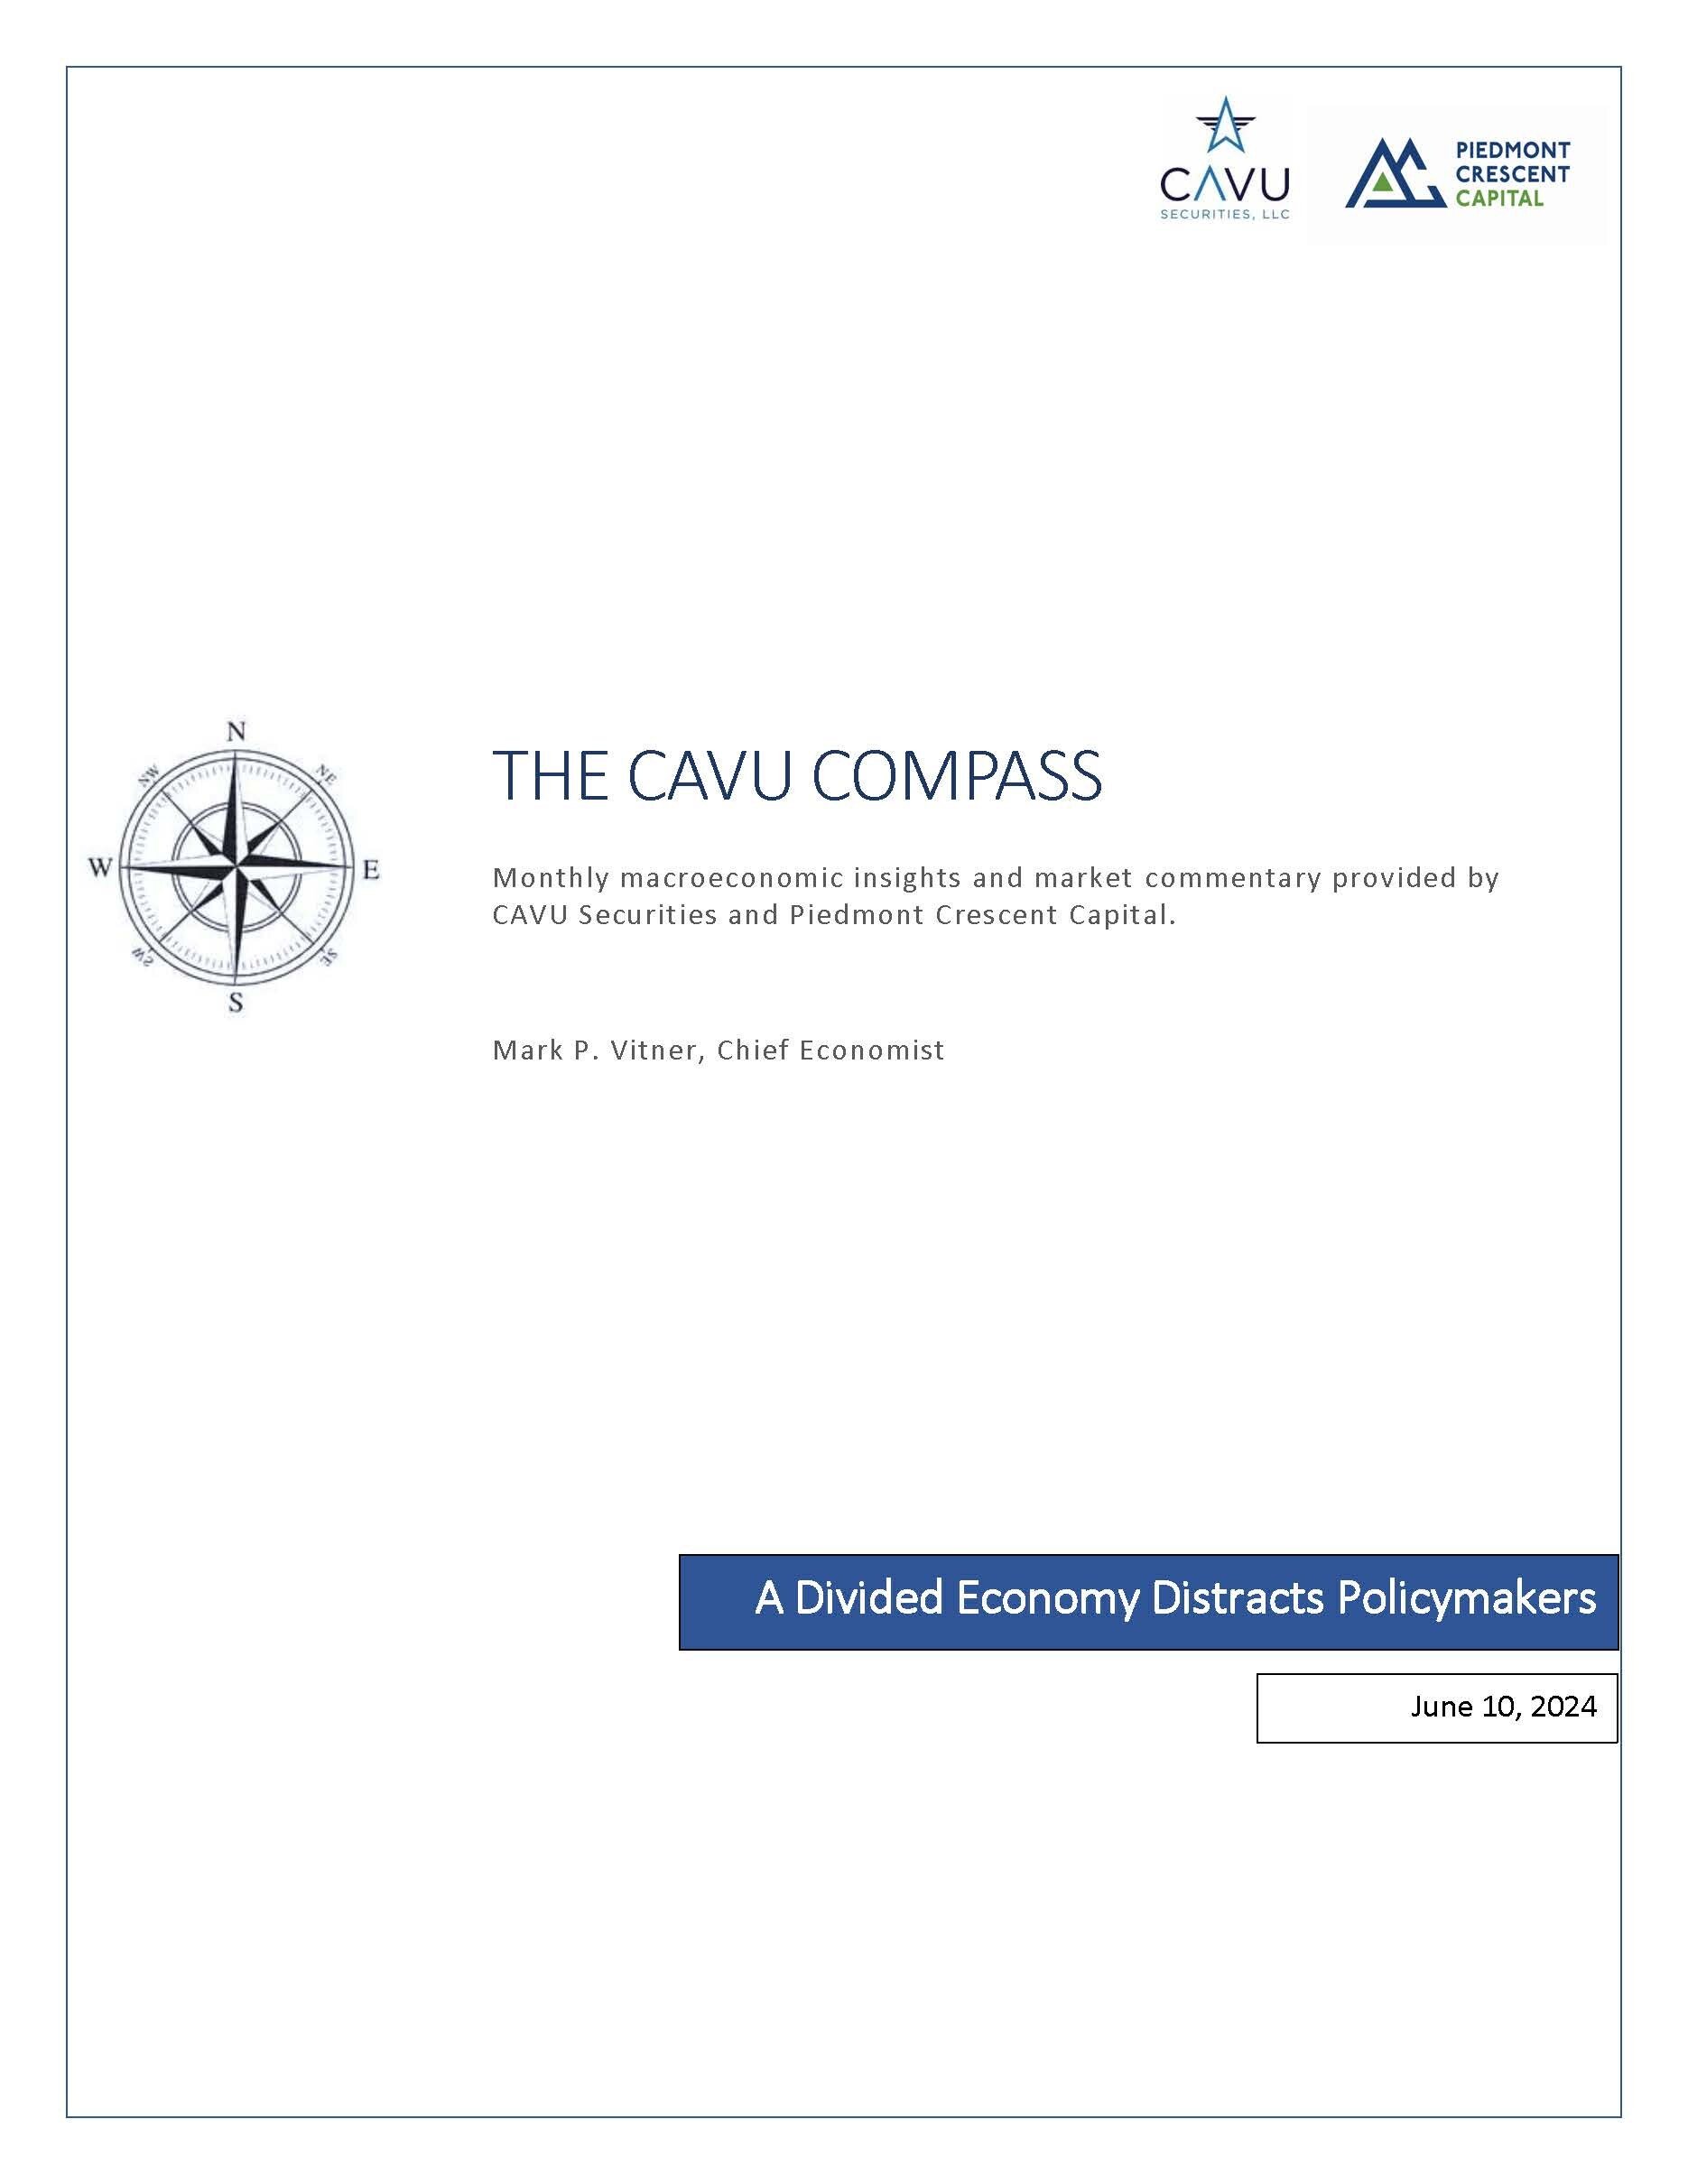 The CAVU Compass - A Divided Economy Distracts Policymakers